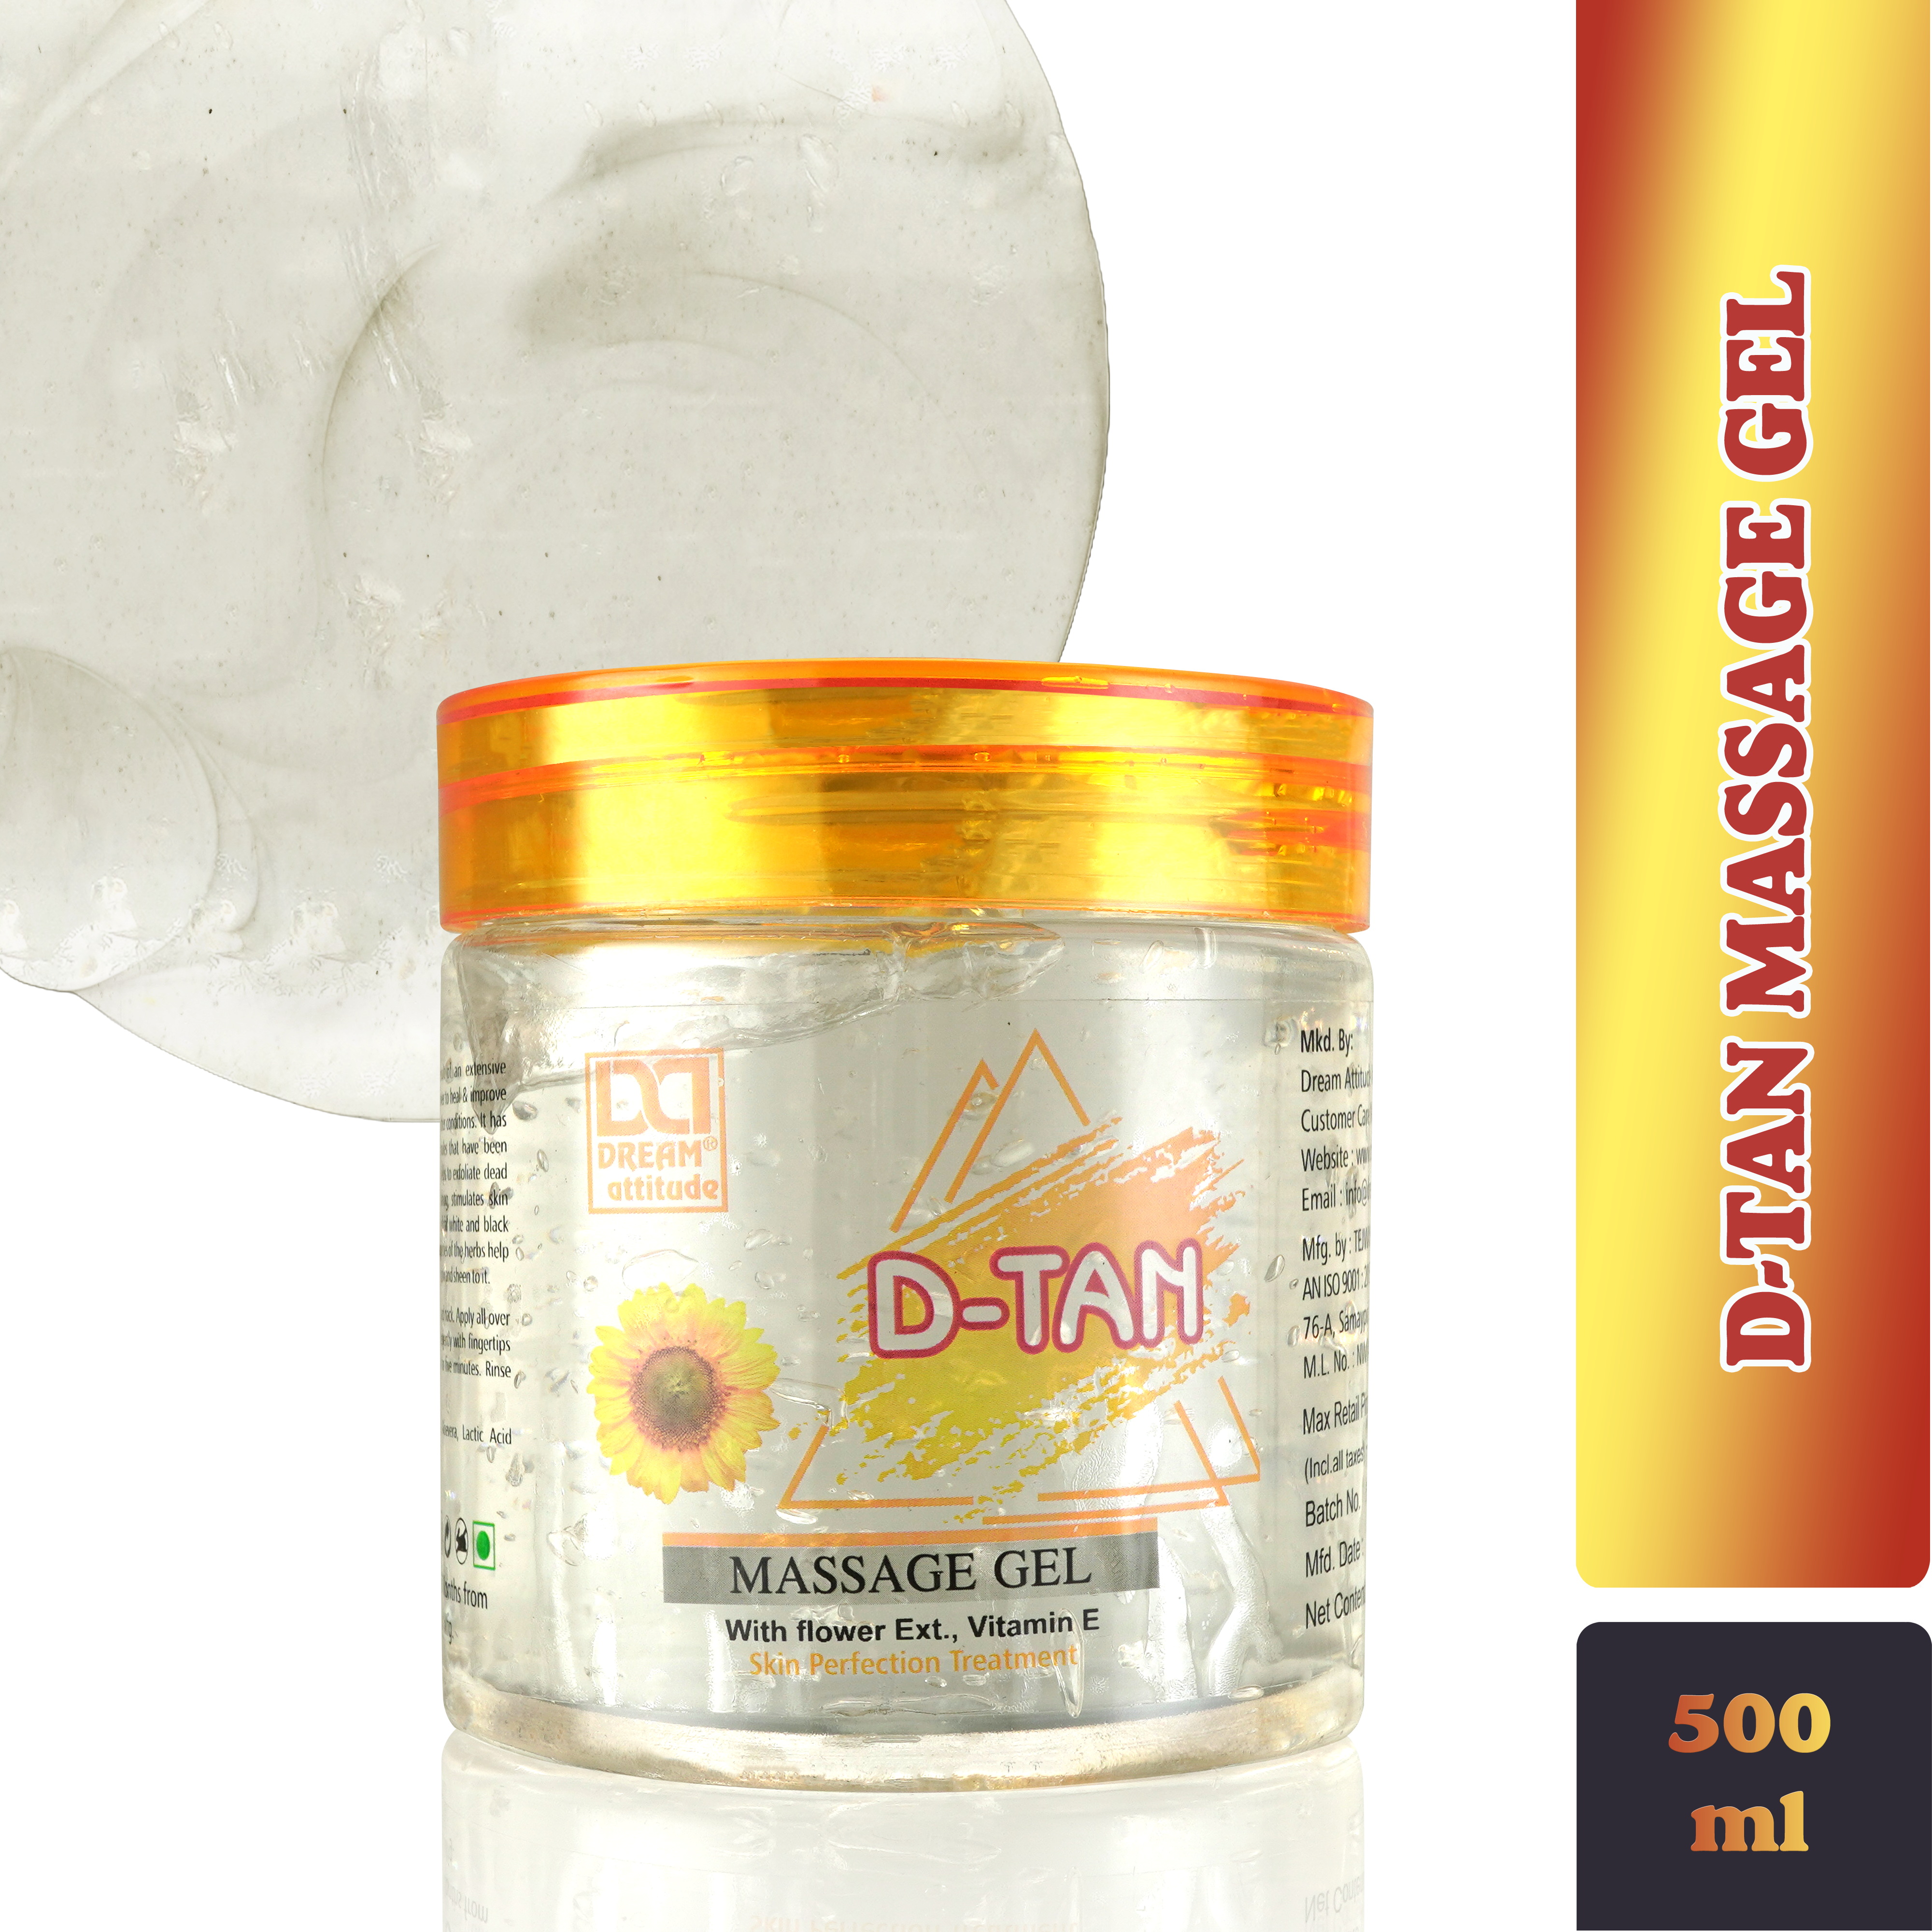 Reveal Your Natural Radiance with DE-TAN MASSAGE GEL